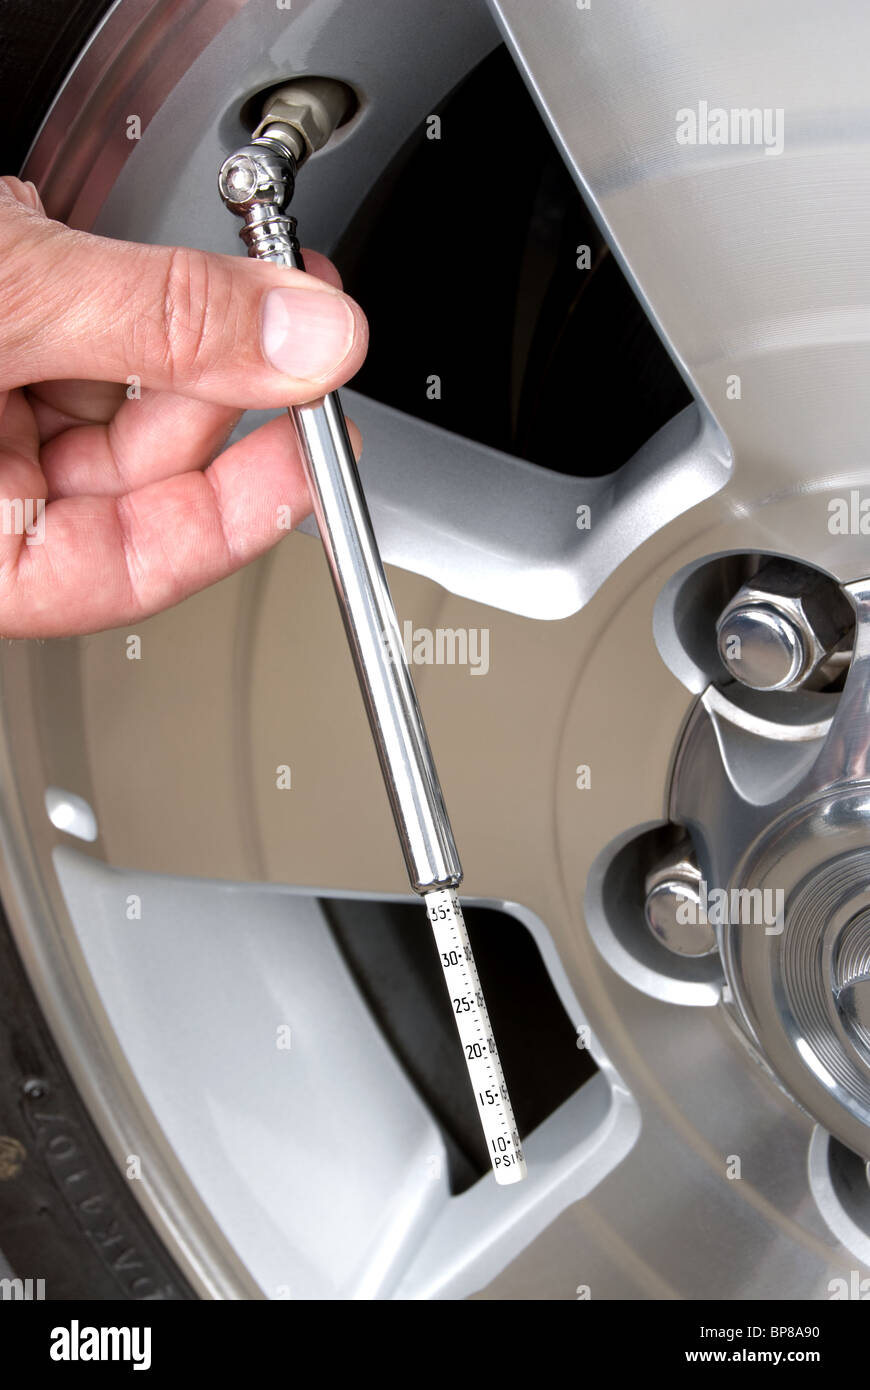 Person checks their tire pressure with a tire gage. This is a good image for responsible car maintenance inferences. Stock Photo